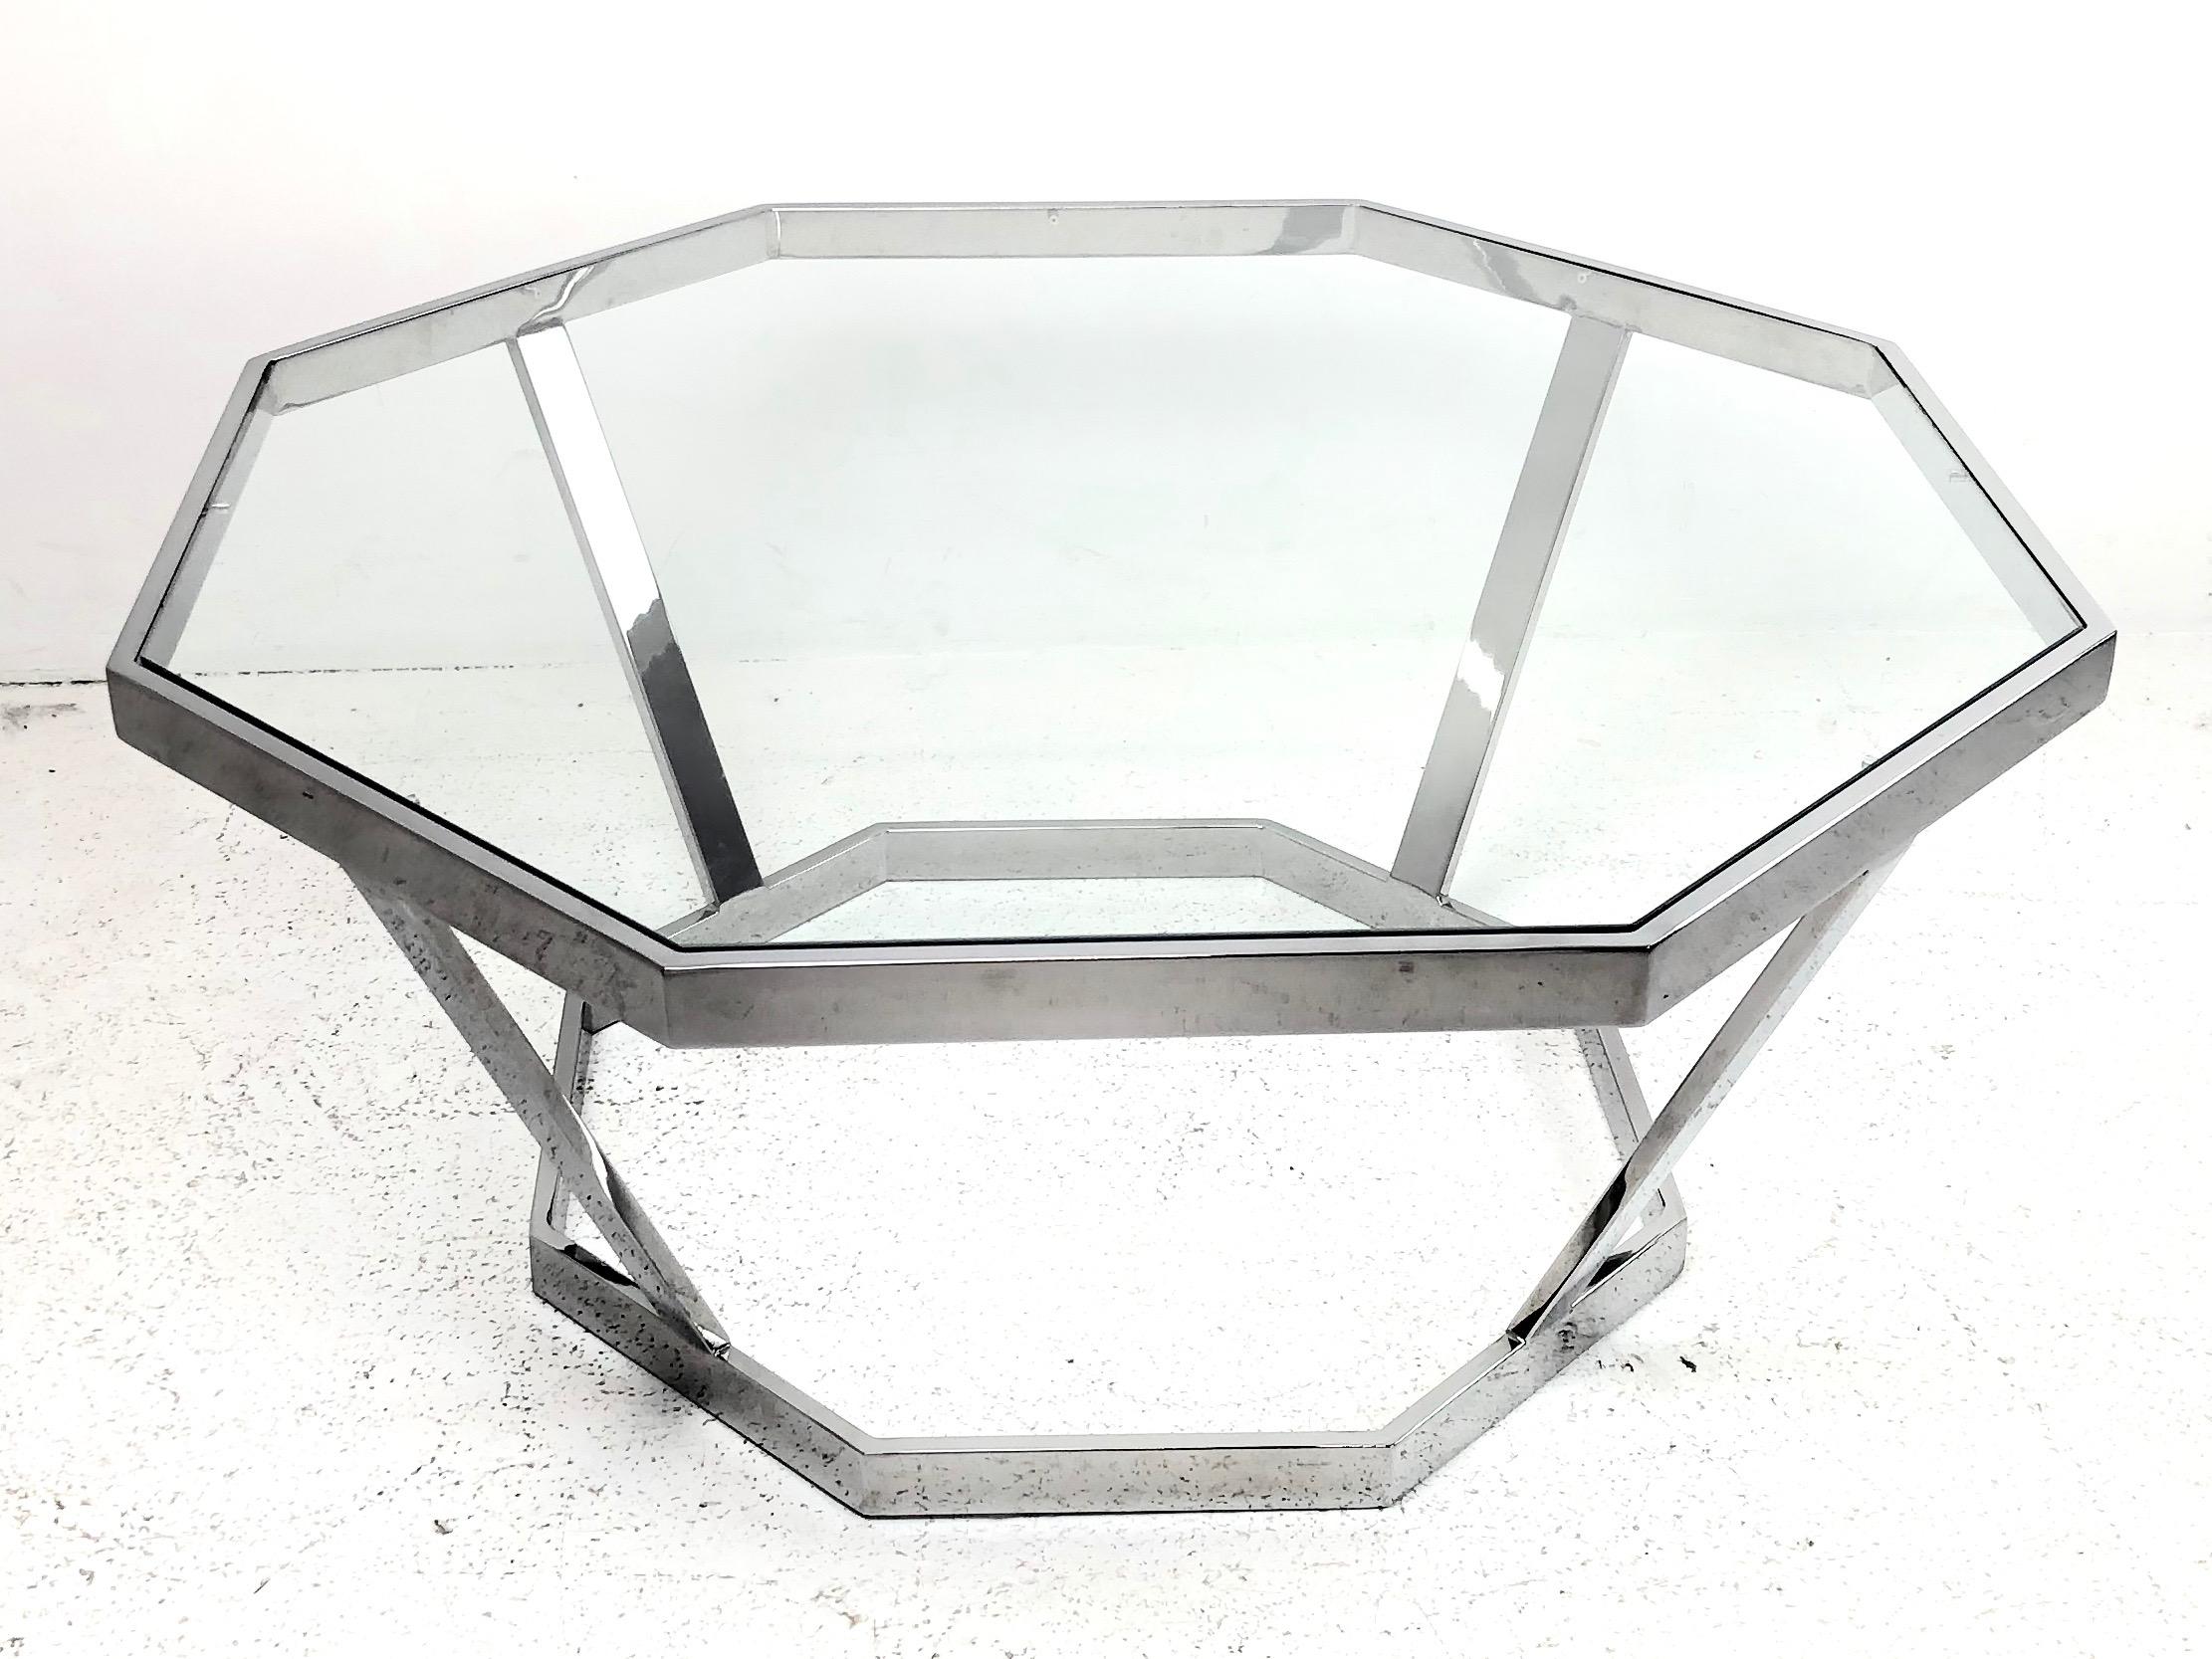 Octagonal chrome coffee table in the style of Milo Baughman. Coffee table is in good vintage condition with wear from age and use.

Dimensions:
36 diameter x 16.